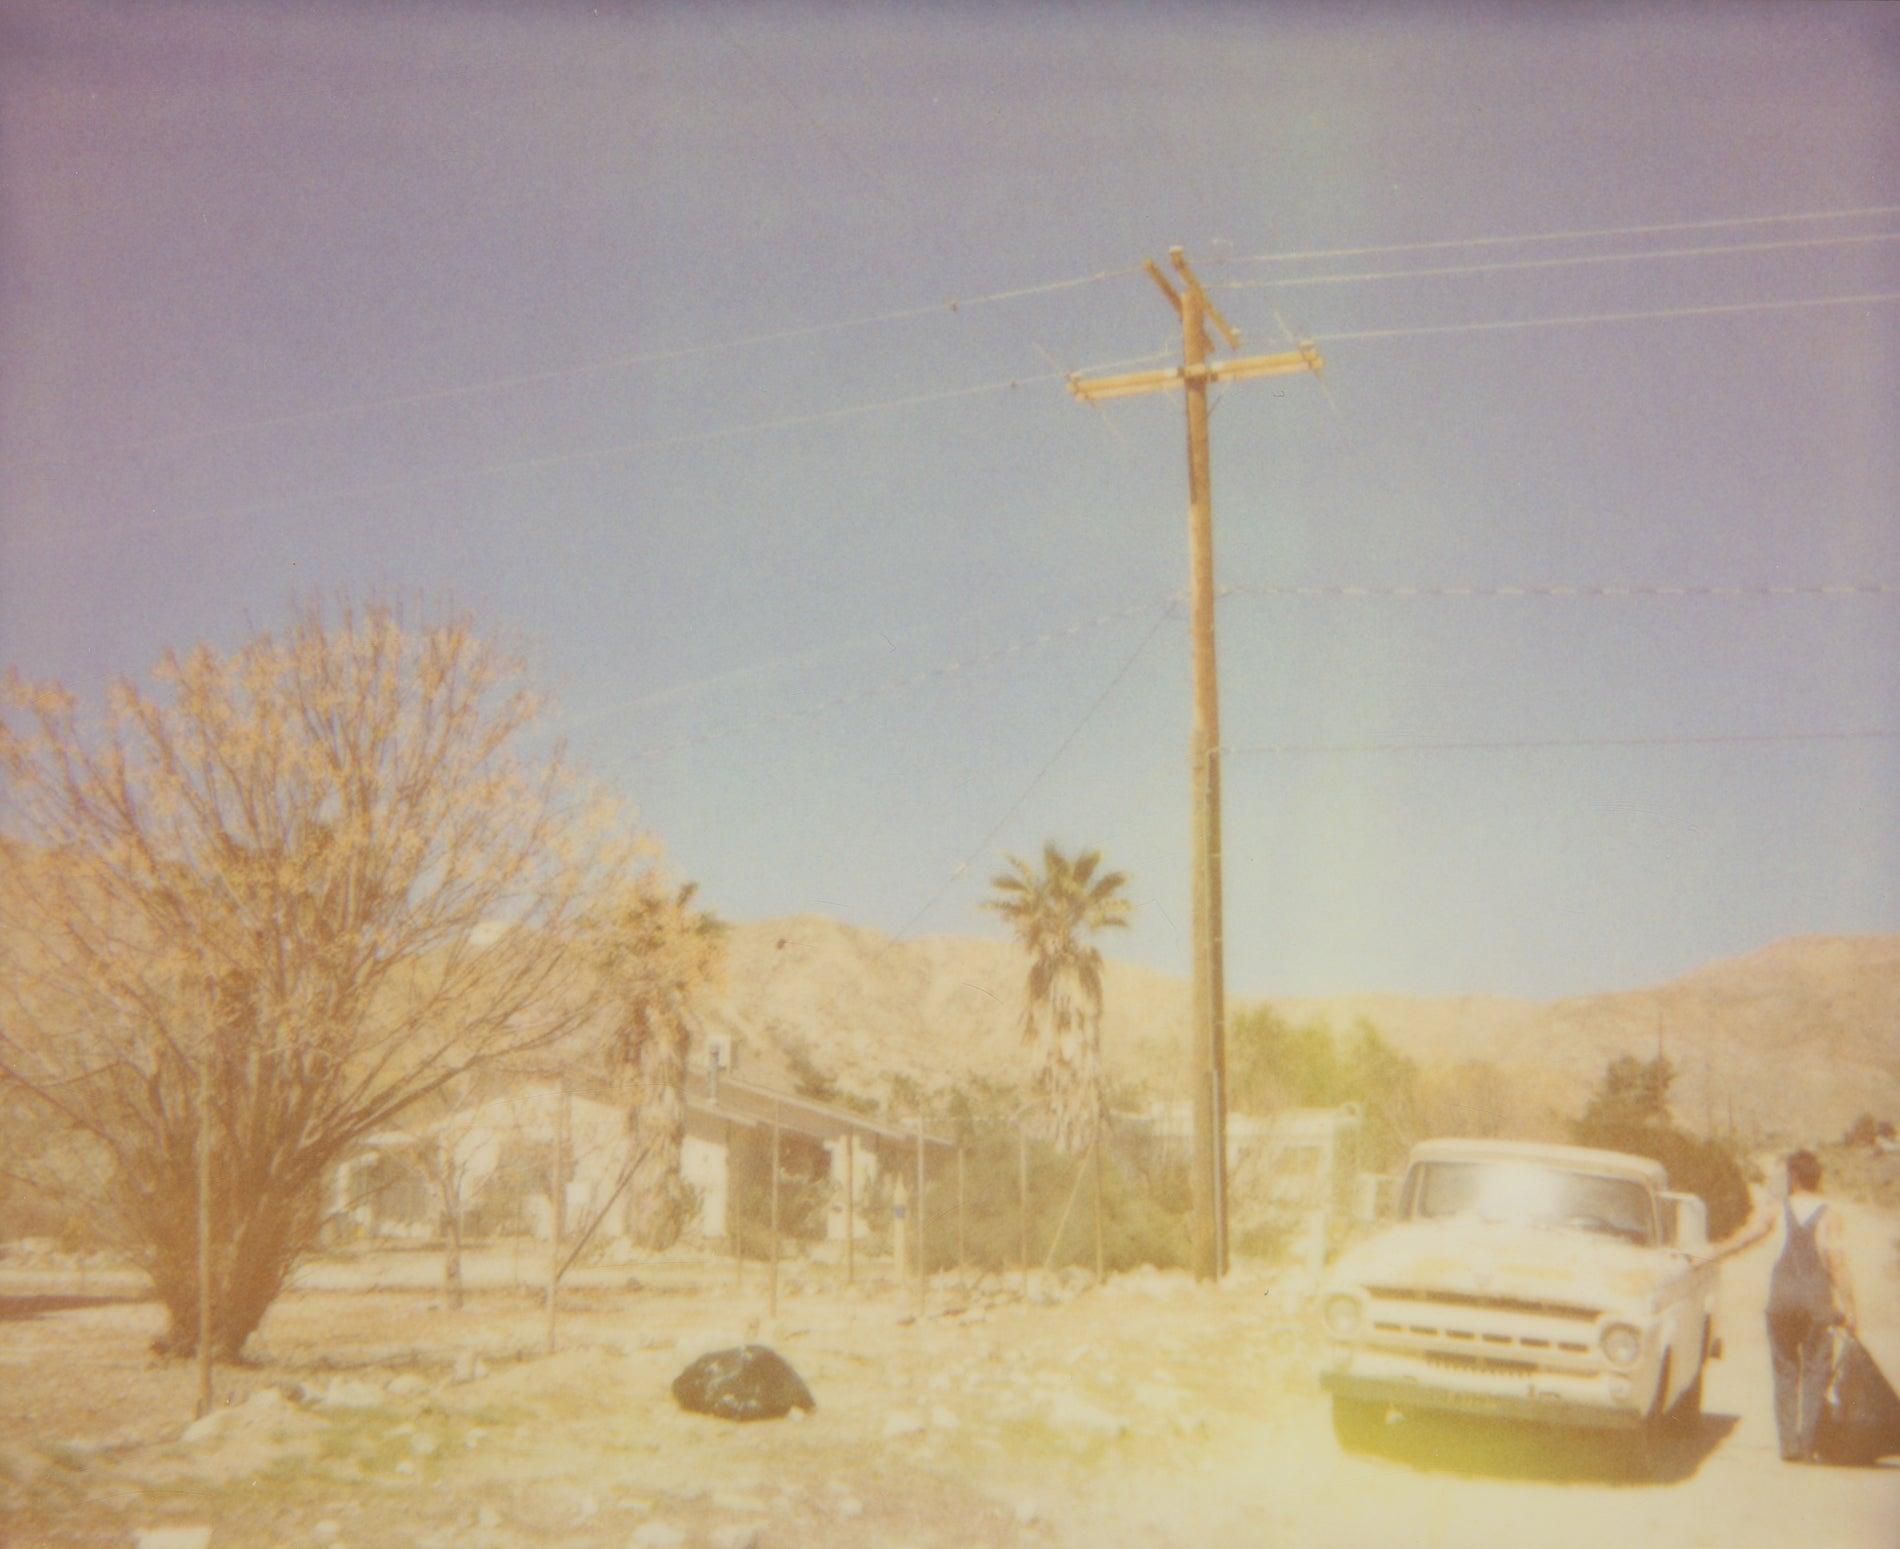 North Star Trail (The Girl behind the White Picket Fence) - Polaroid, Color